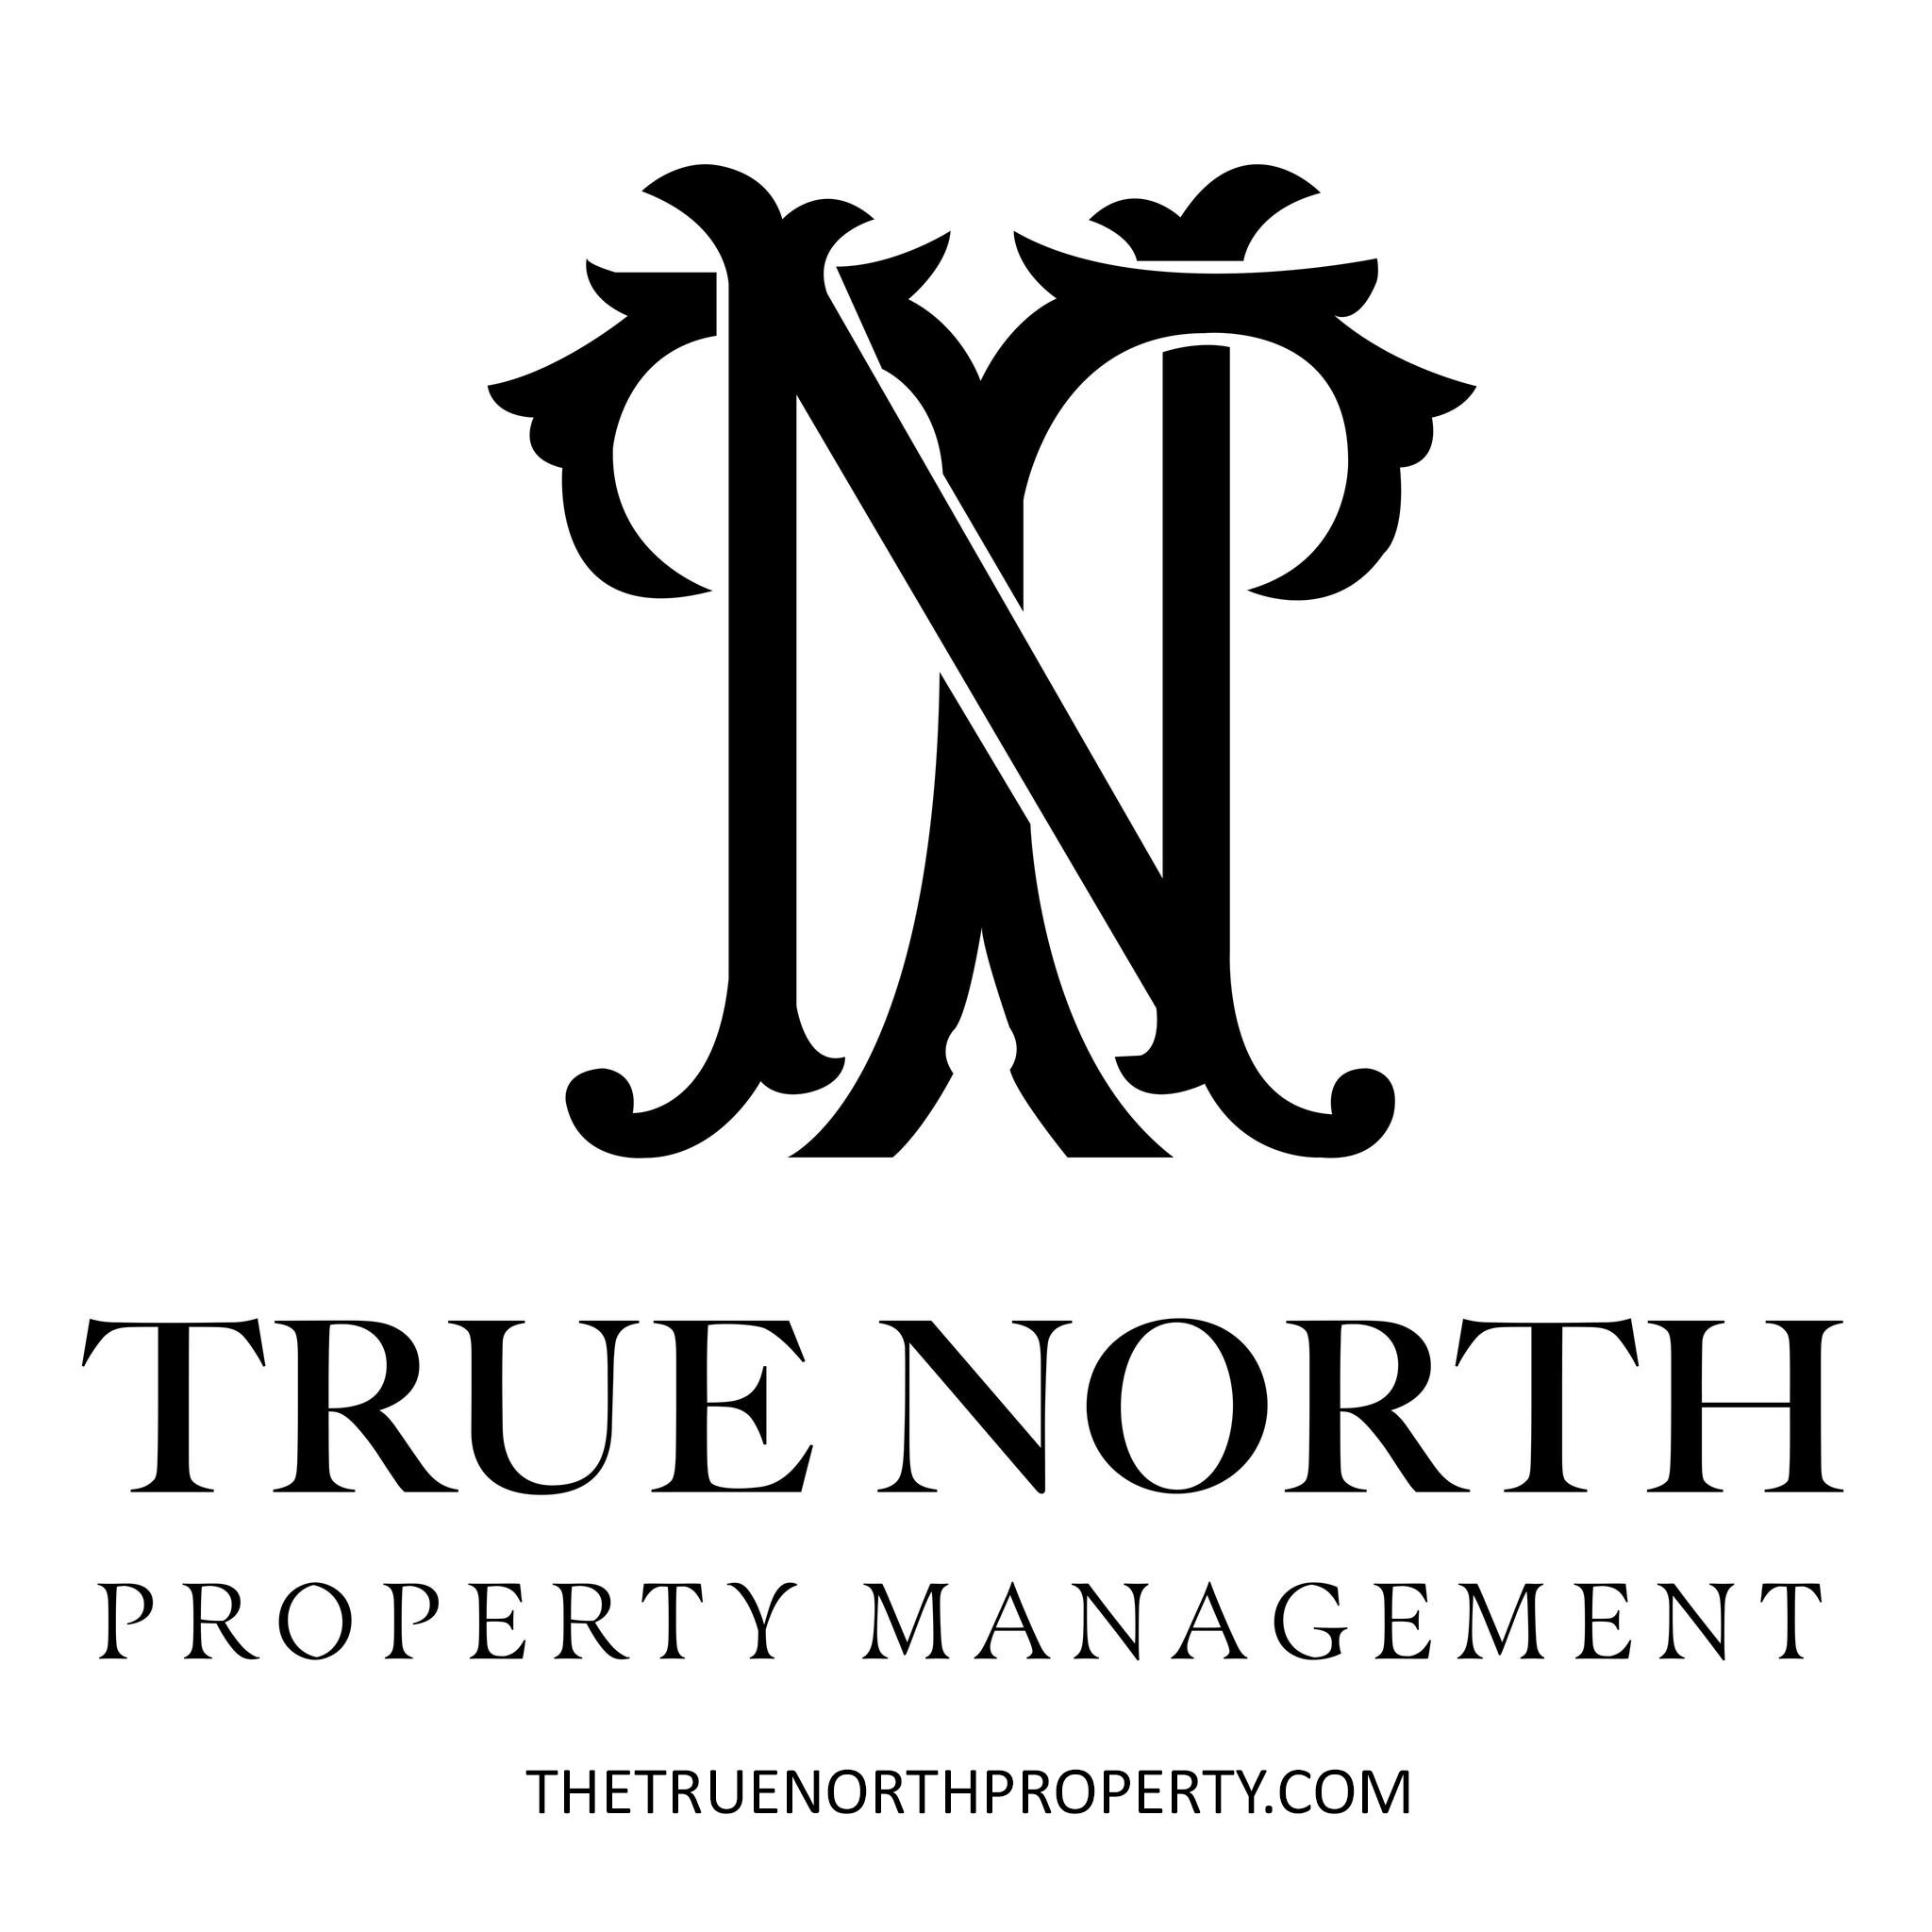 True North: Founded in 2014.
Stemming from Traverse City, Michigan; we're a locally based, kind-hearted, passionate team who have dreams of curating fantastic guest stays and warm memories.